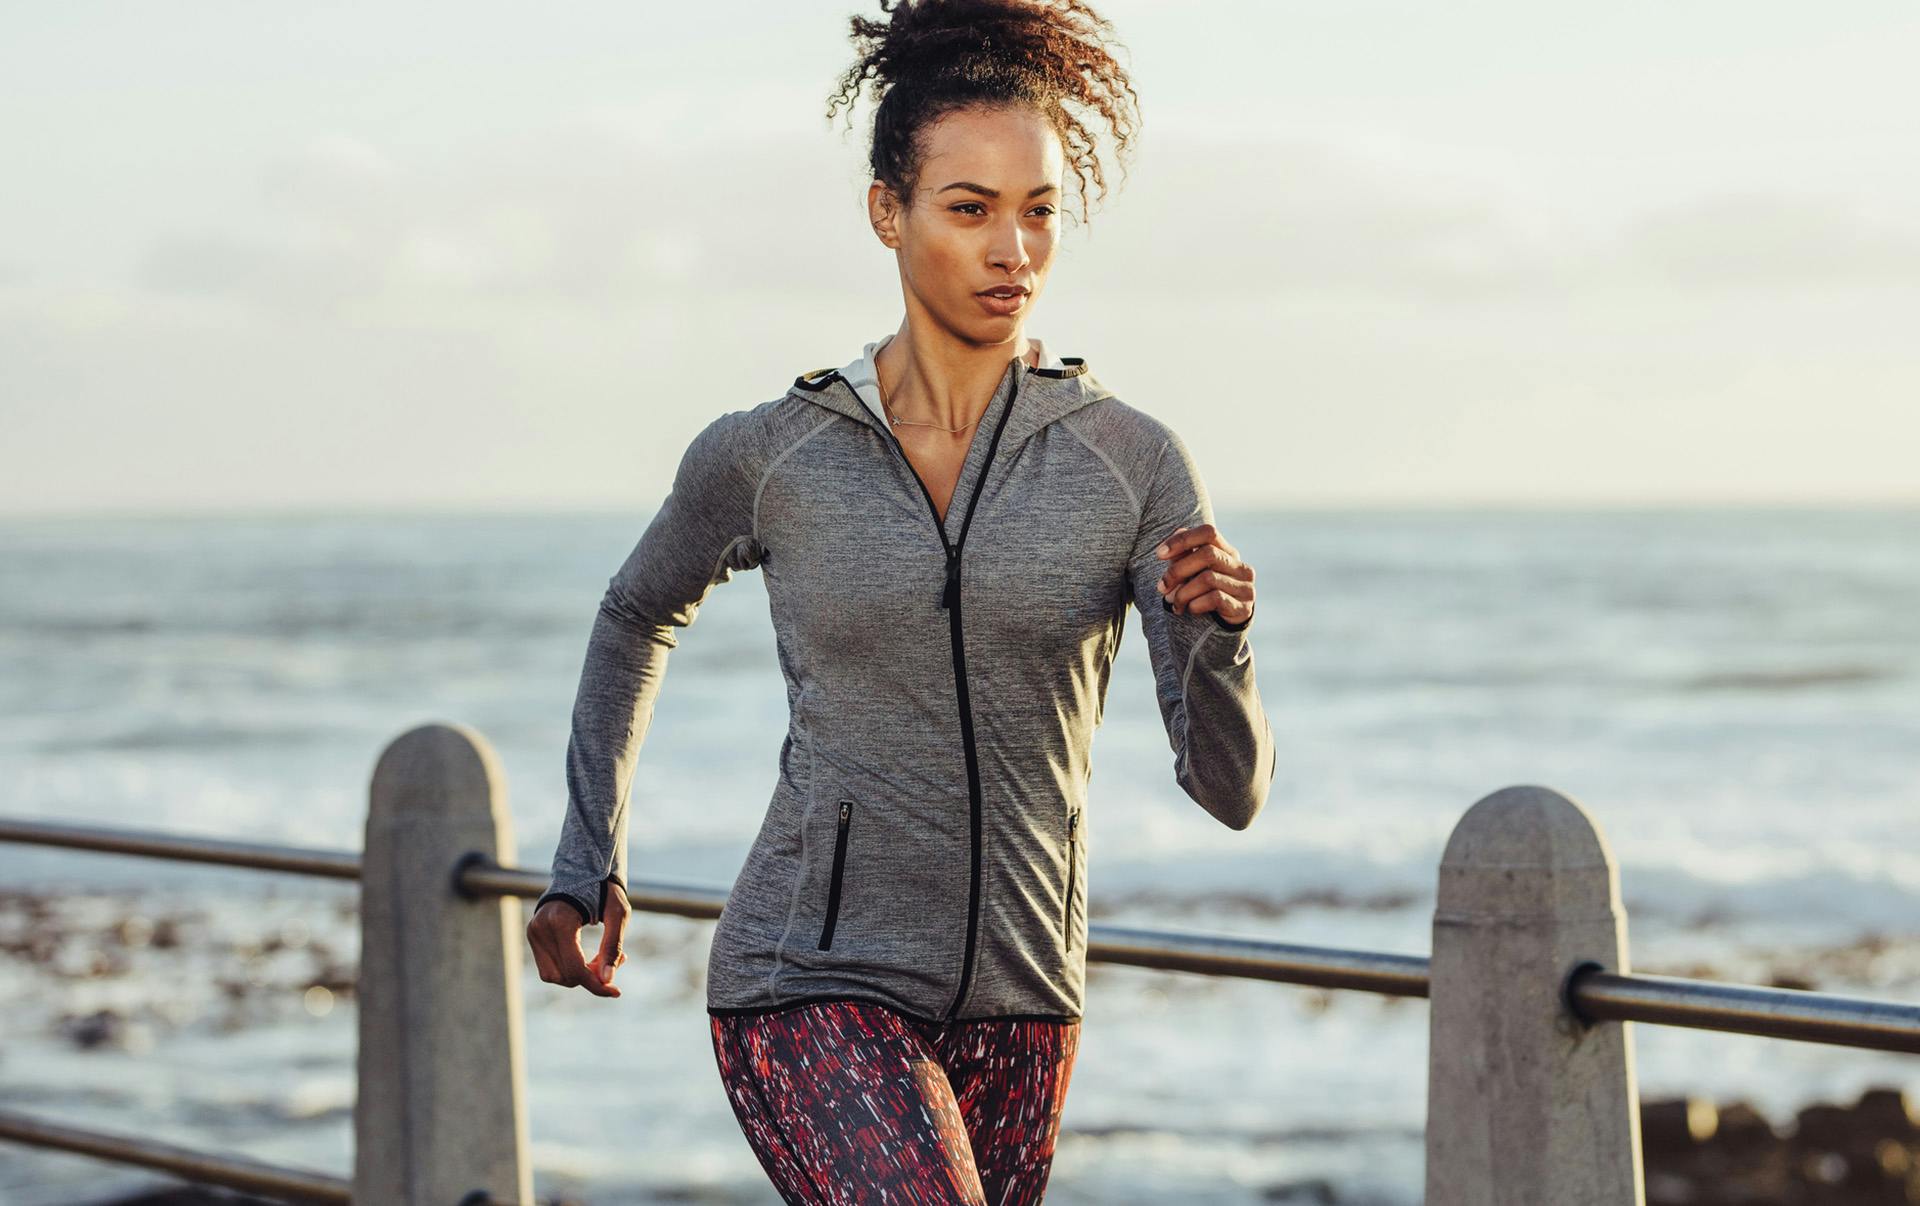 Woman in activewear jogging on jetty.